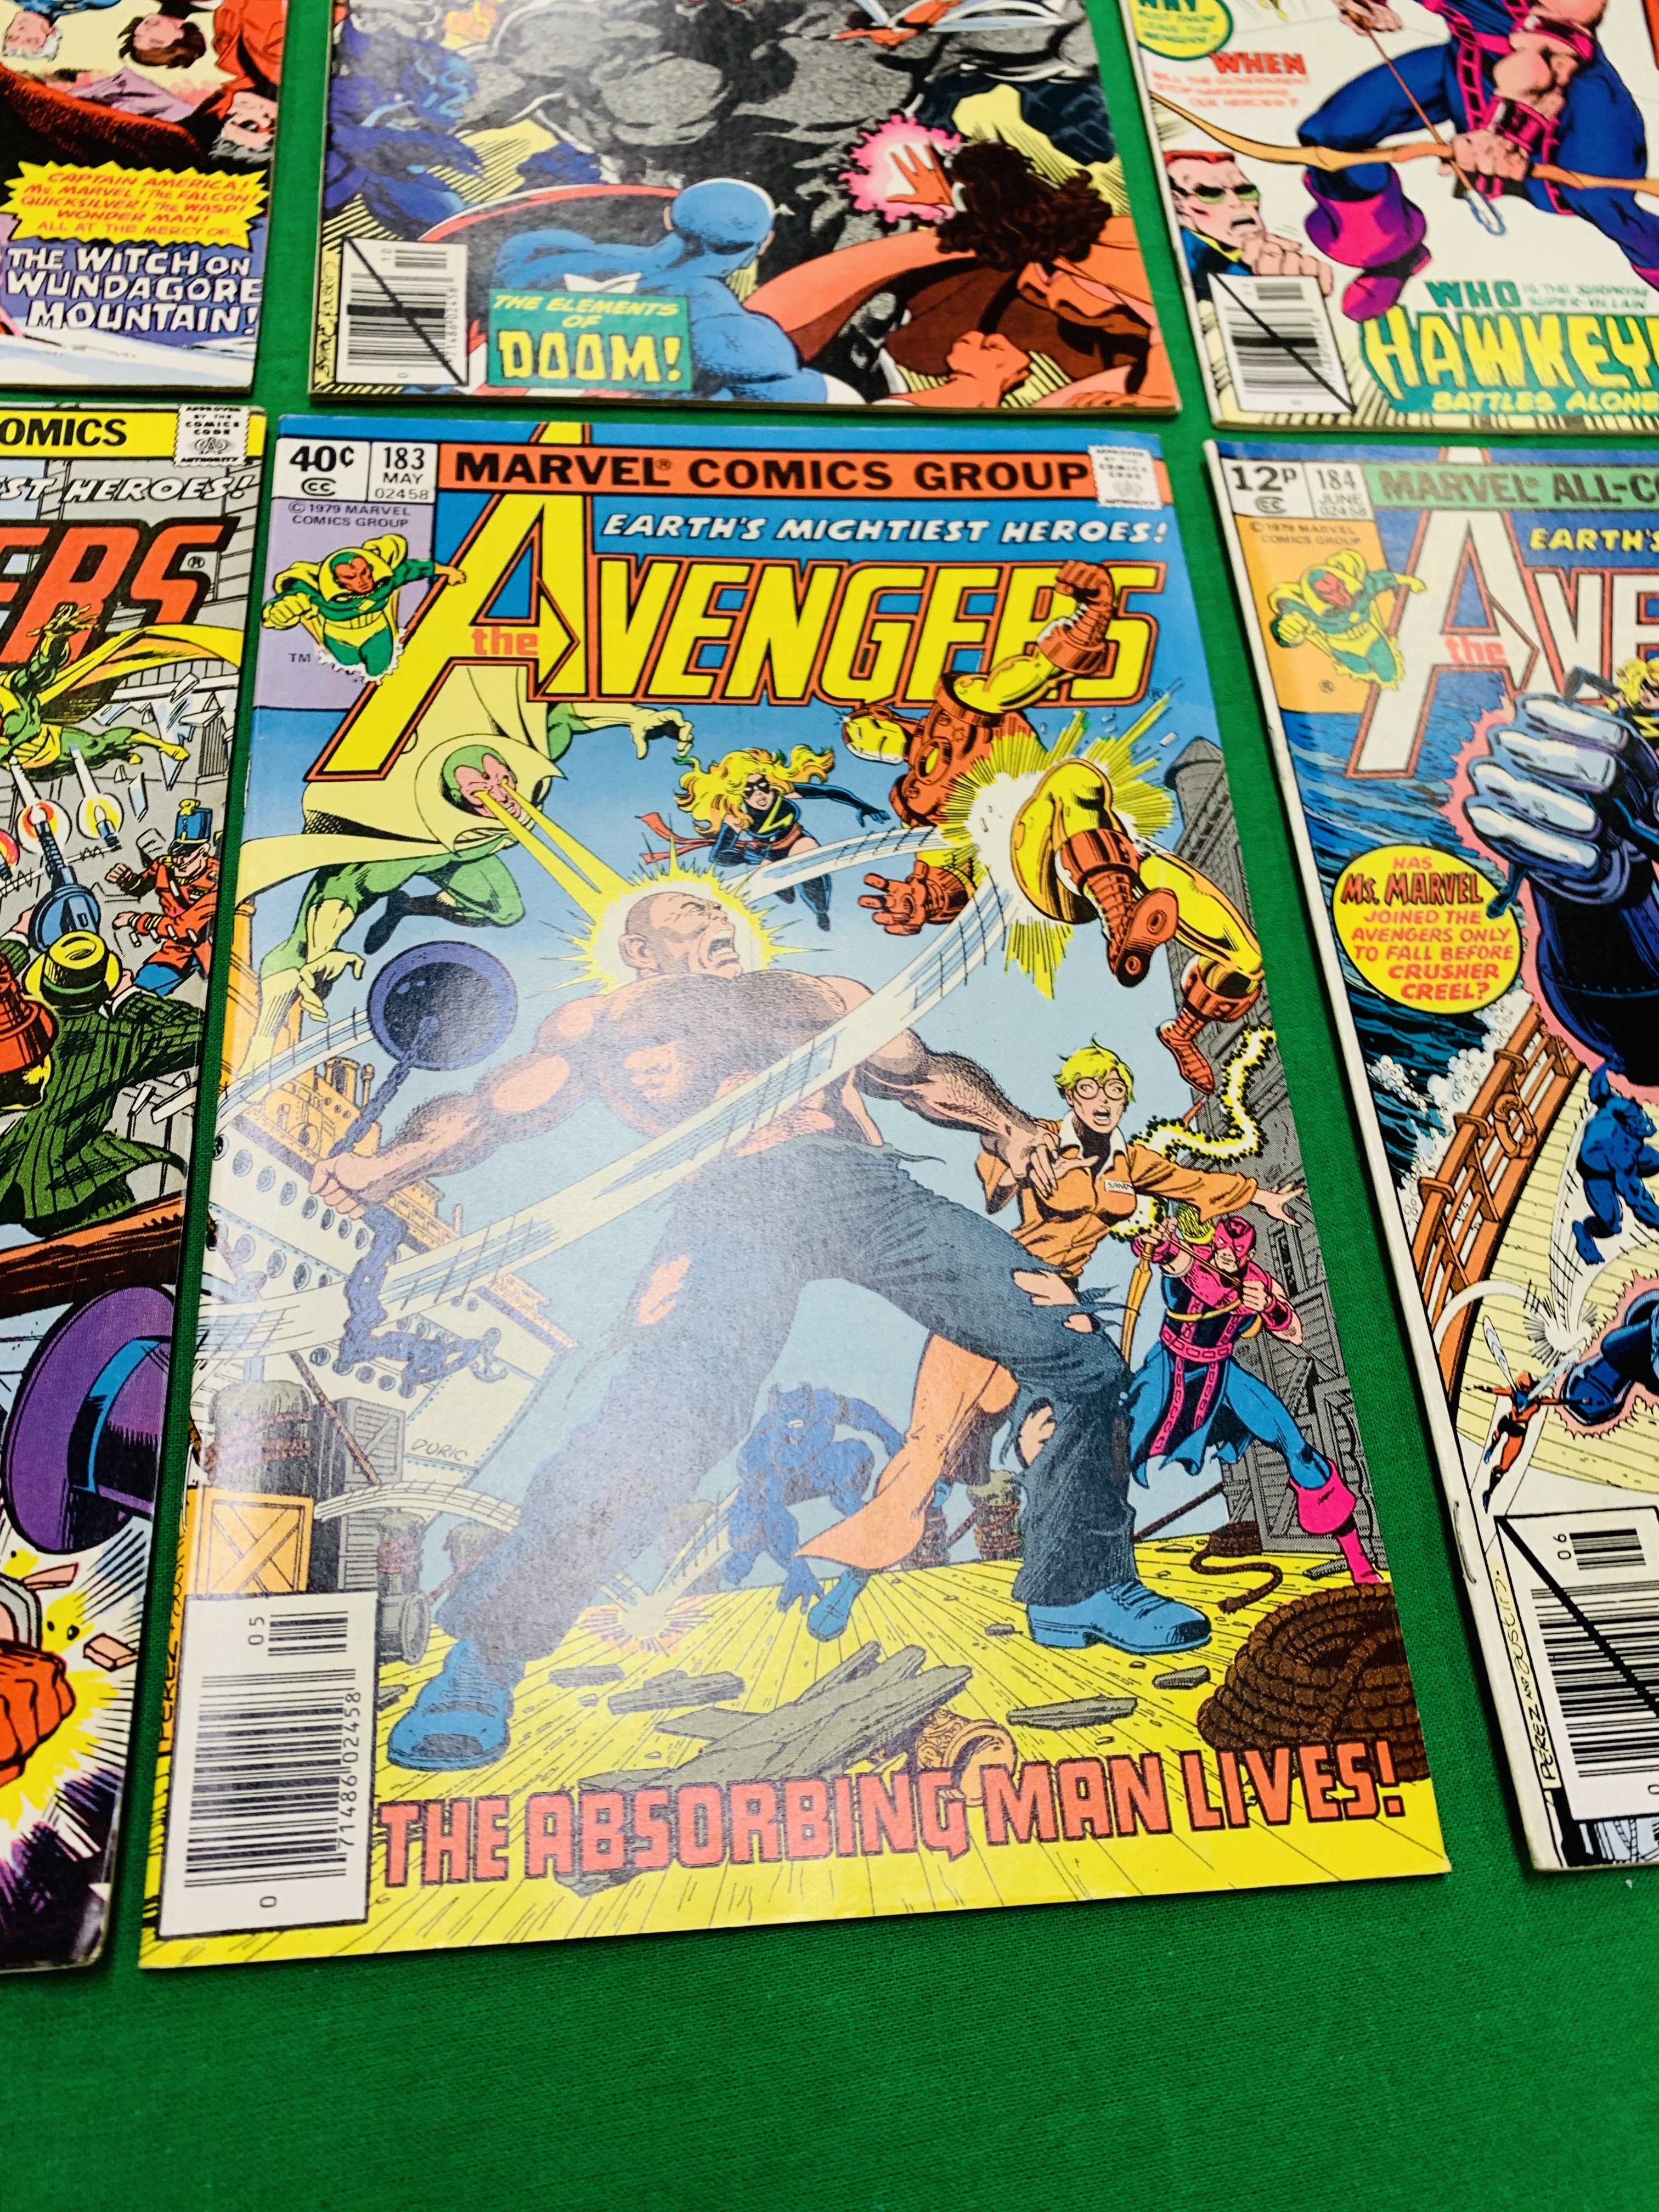 MARVEL COMICS THE AVENGERS NO. 101 - 299, MISSING ISSUES 103 AND 110. - Image 62 of 130